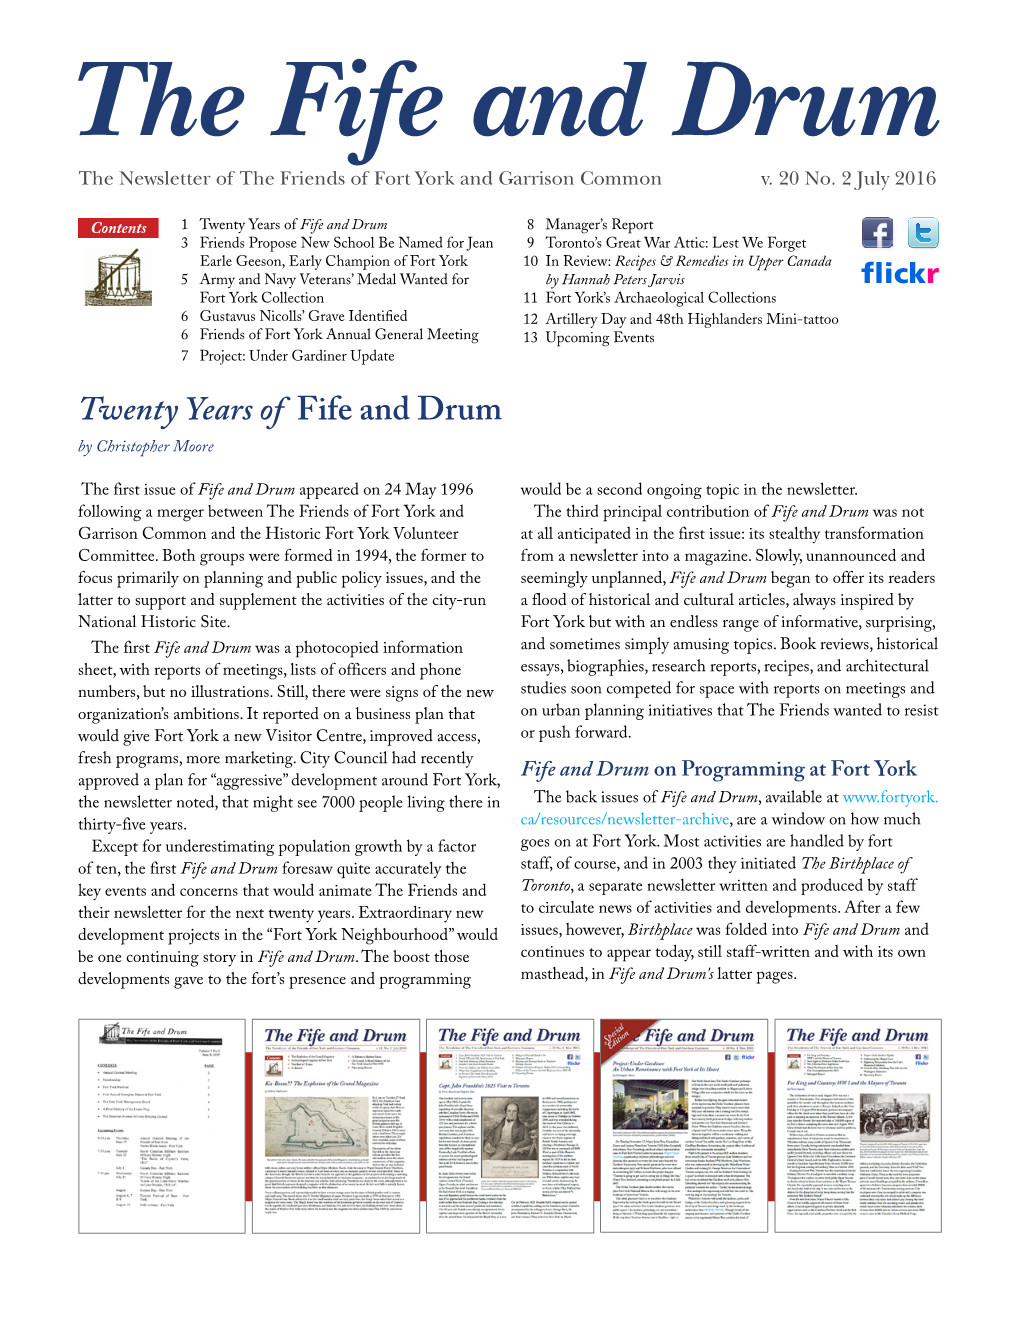 The Fife and Drum, July 2016, V. 20 No. 2